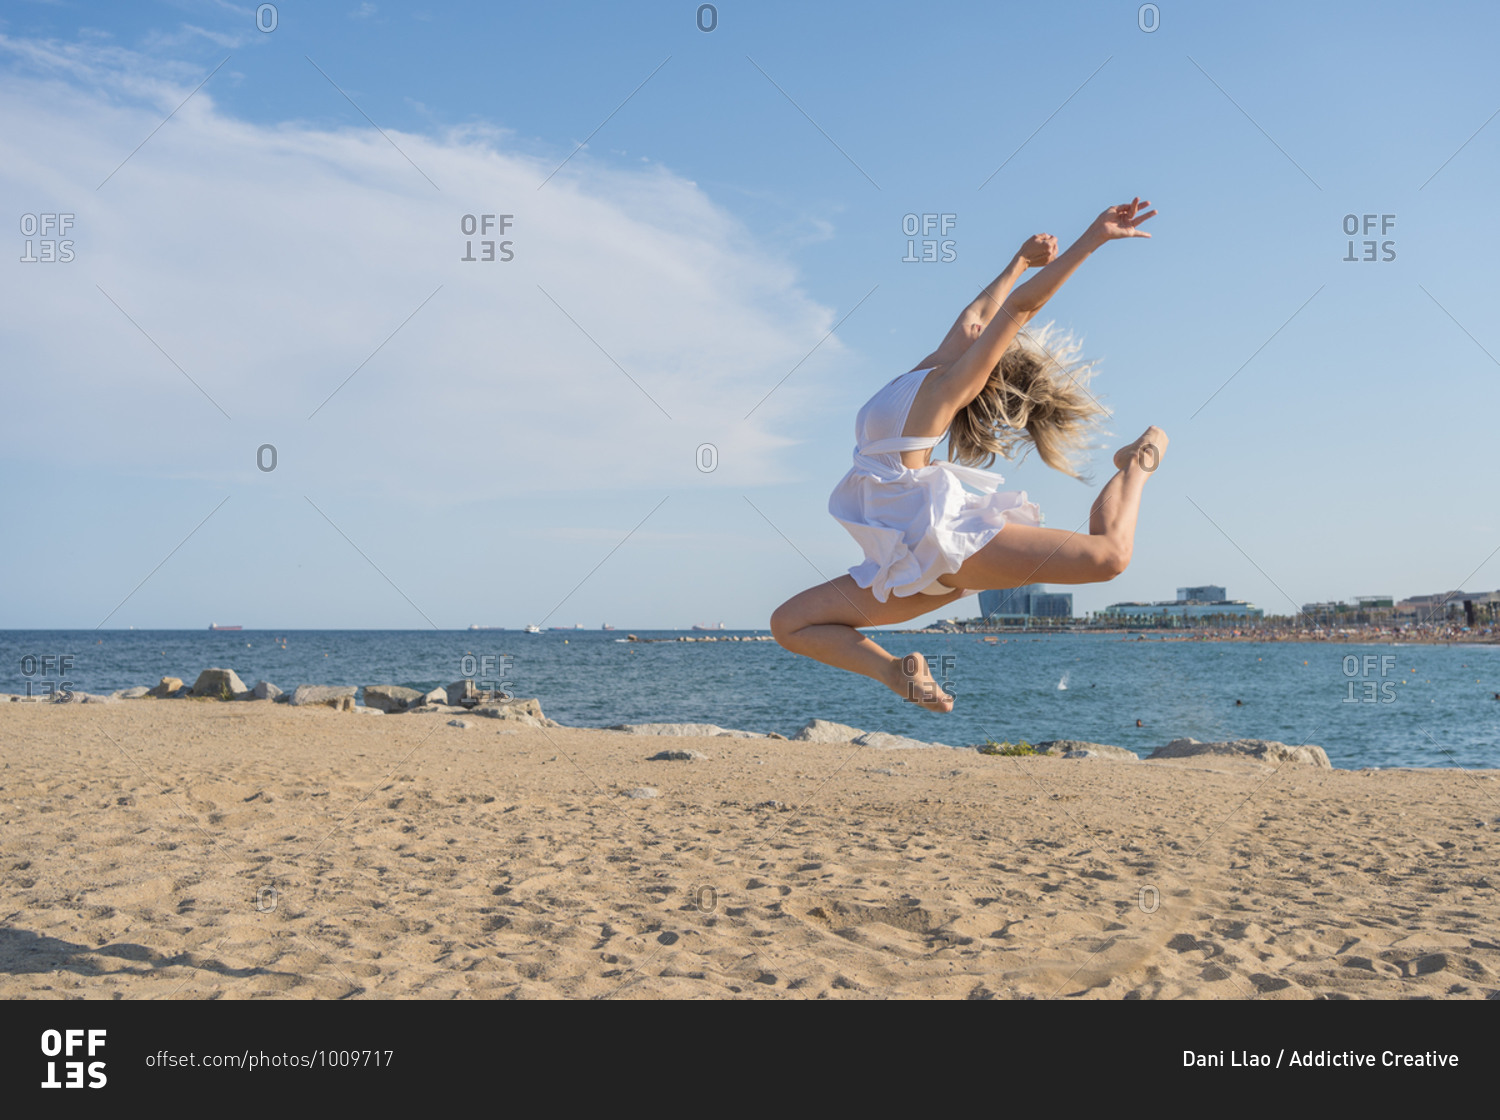 Full length side view of unrecognizable barefoot female dancer in white dress jumping up while performing dynamic dance moves with arms raised on sandy beach